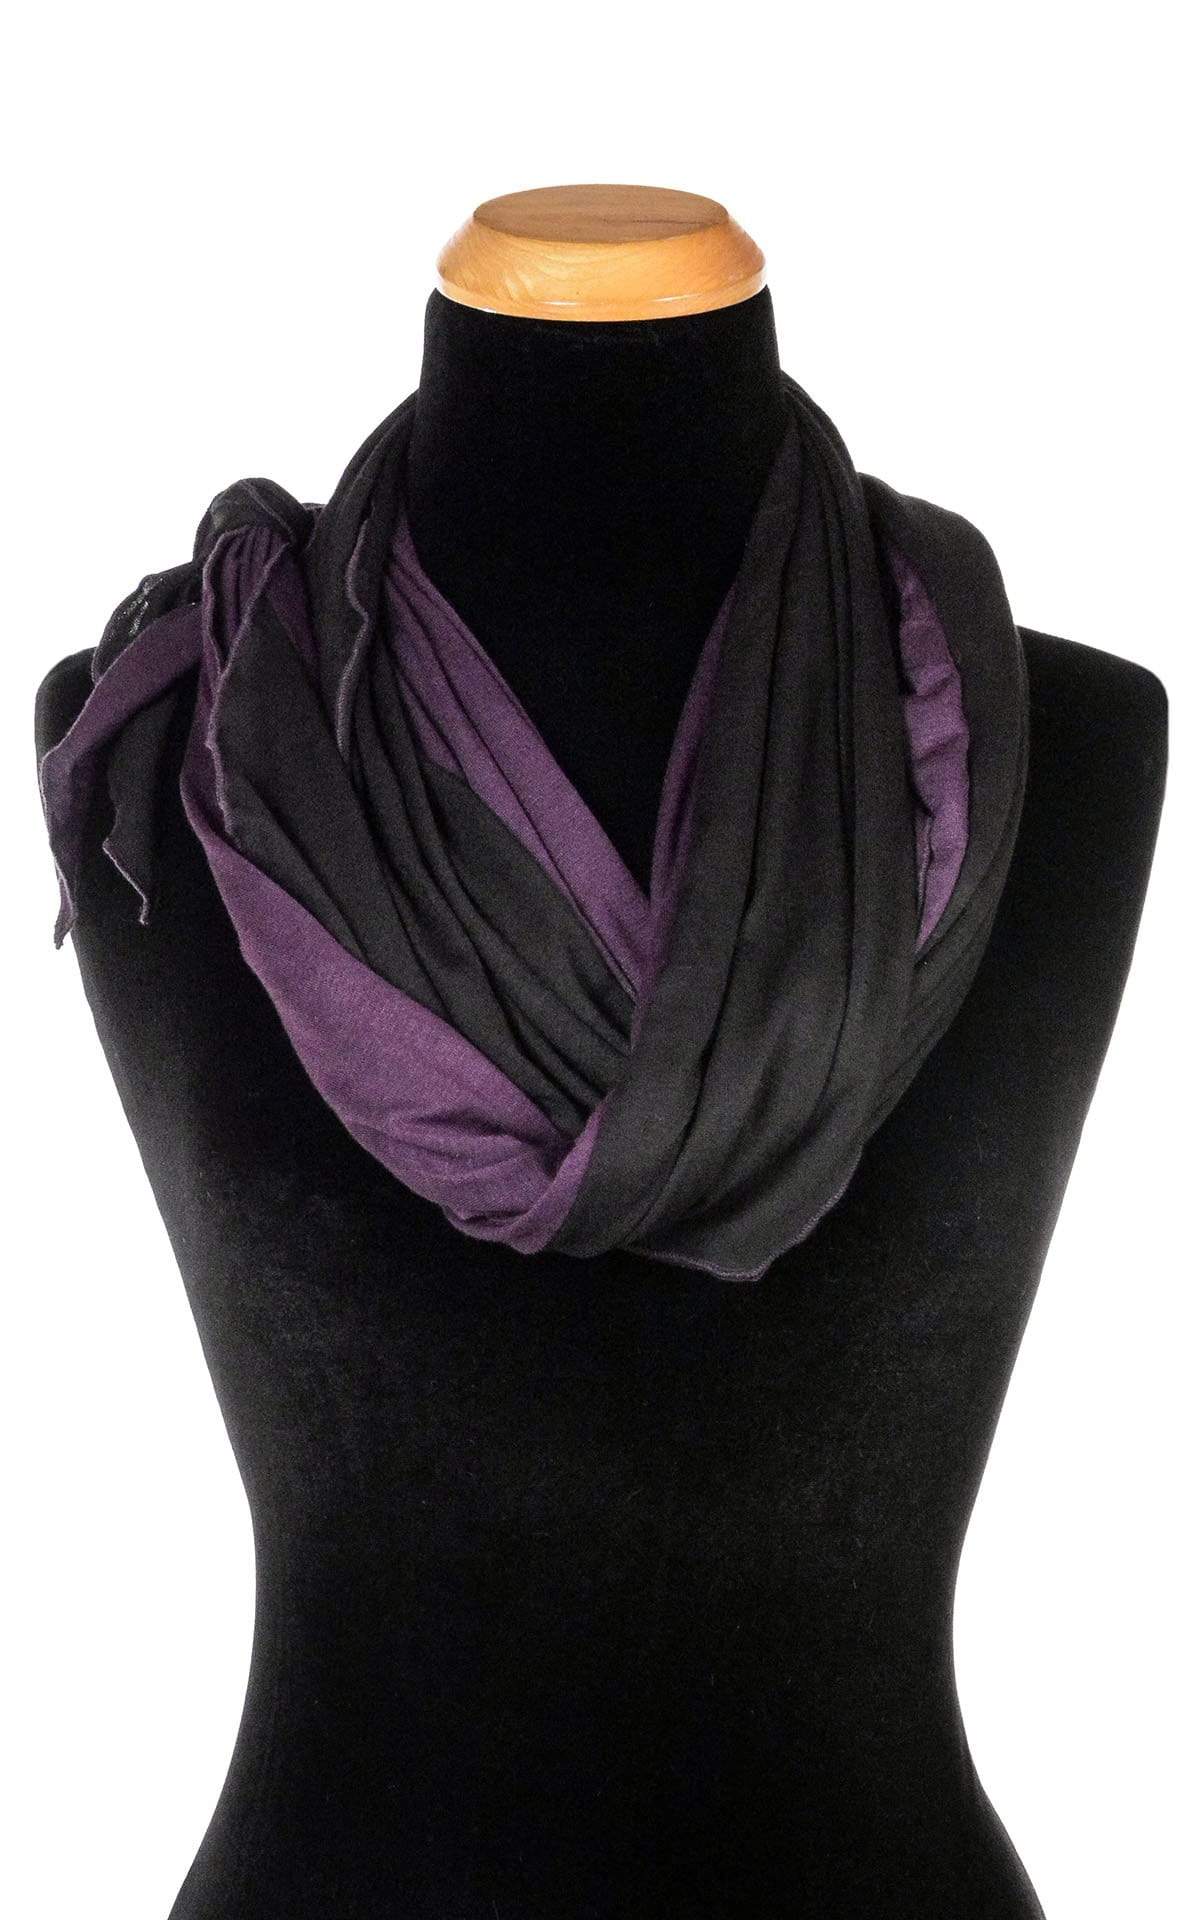 Ladies Large Handkerchief Scarf, Wrap jersey knit fabric on a mannequin wrapped twice | Abyss W/ Purple Haze, black and  Plum | Handmade in Seattle WA | Pandemonium Millinery